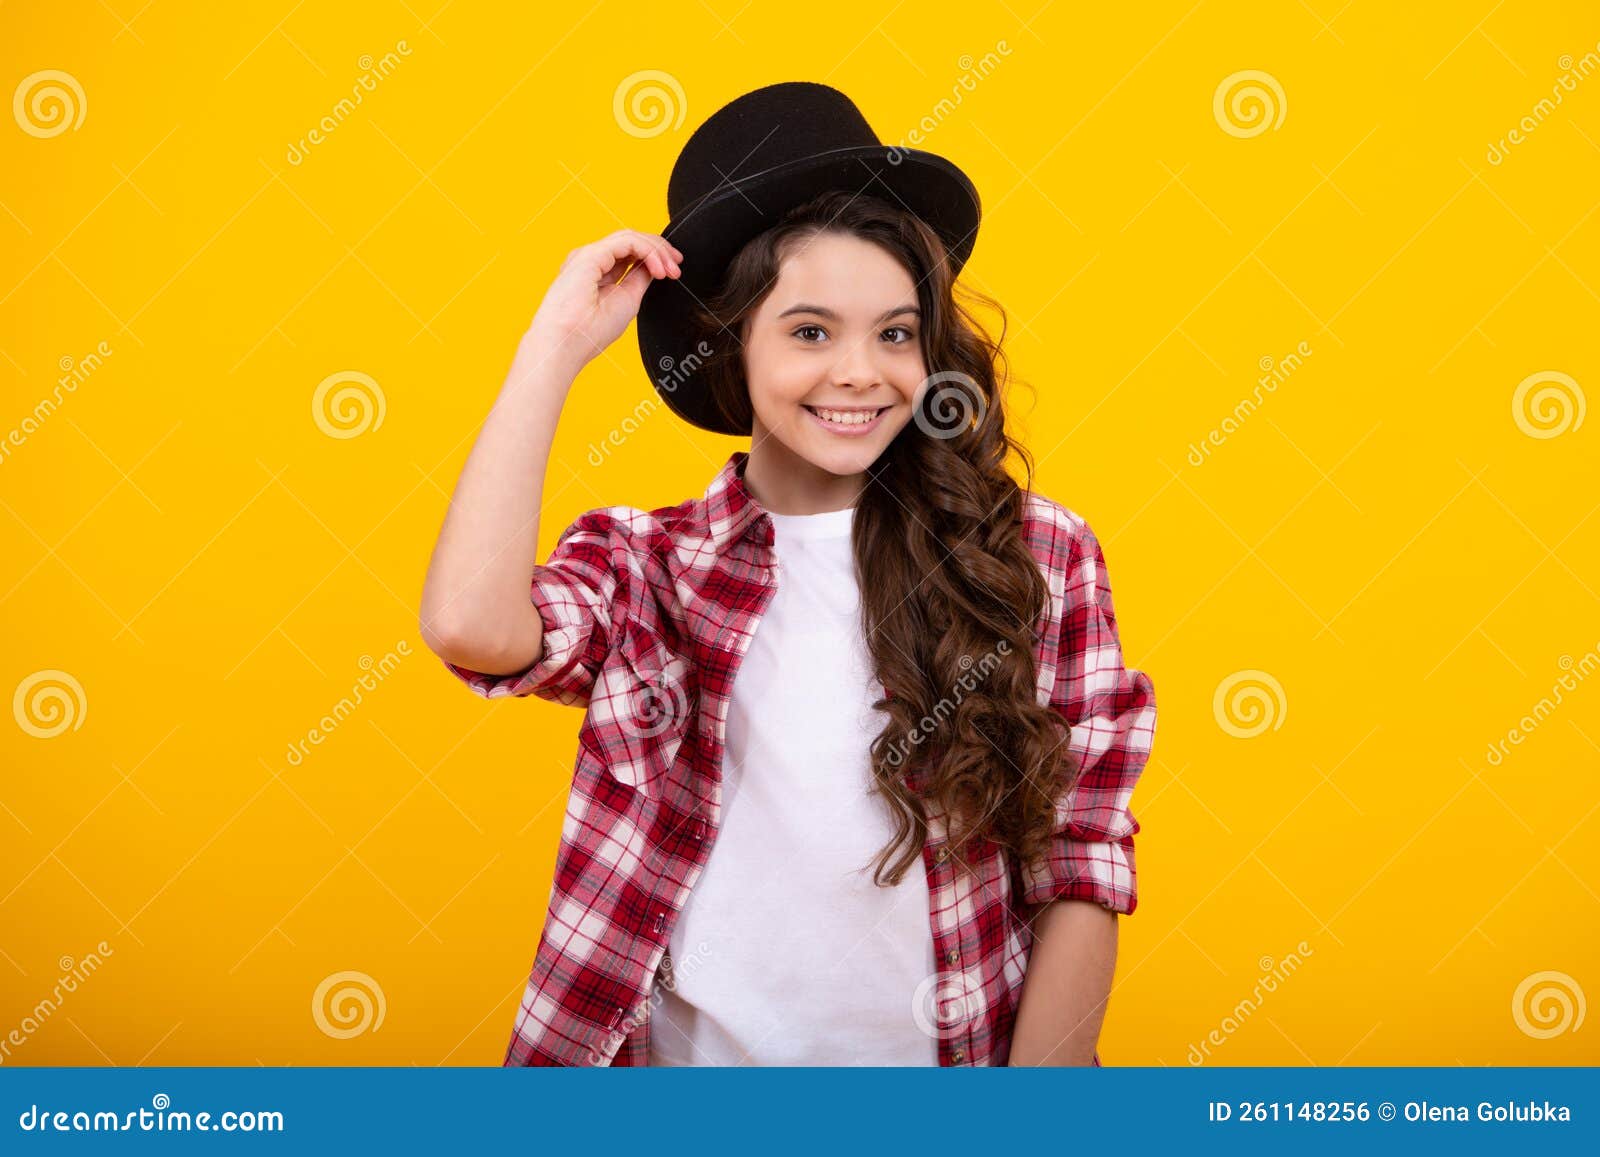 kids girl in old fashion clothes. elegent hat, cylinder hat  on yellow background. headwear. clothes accessories